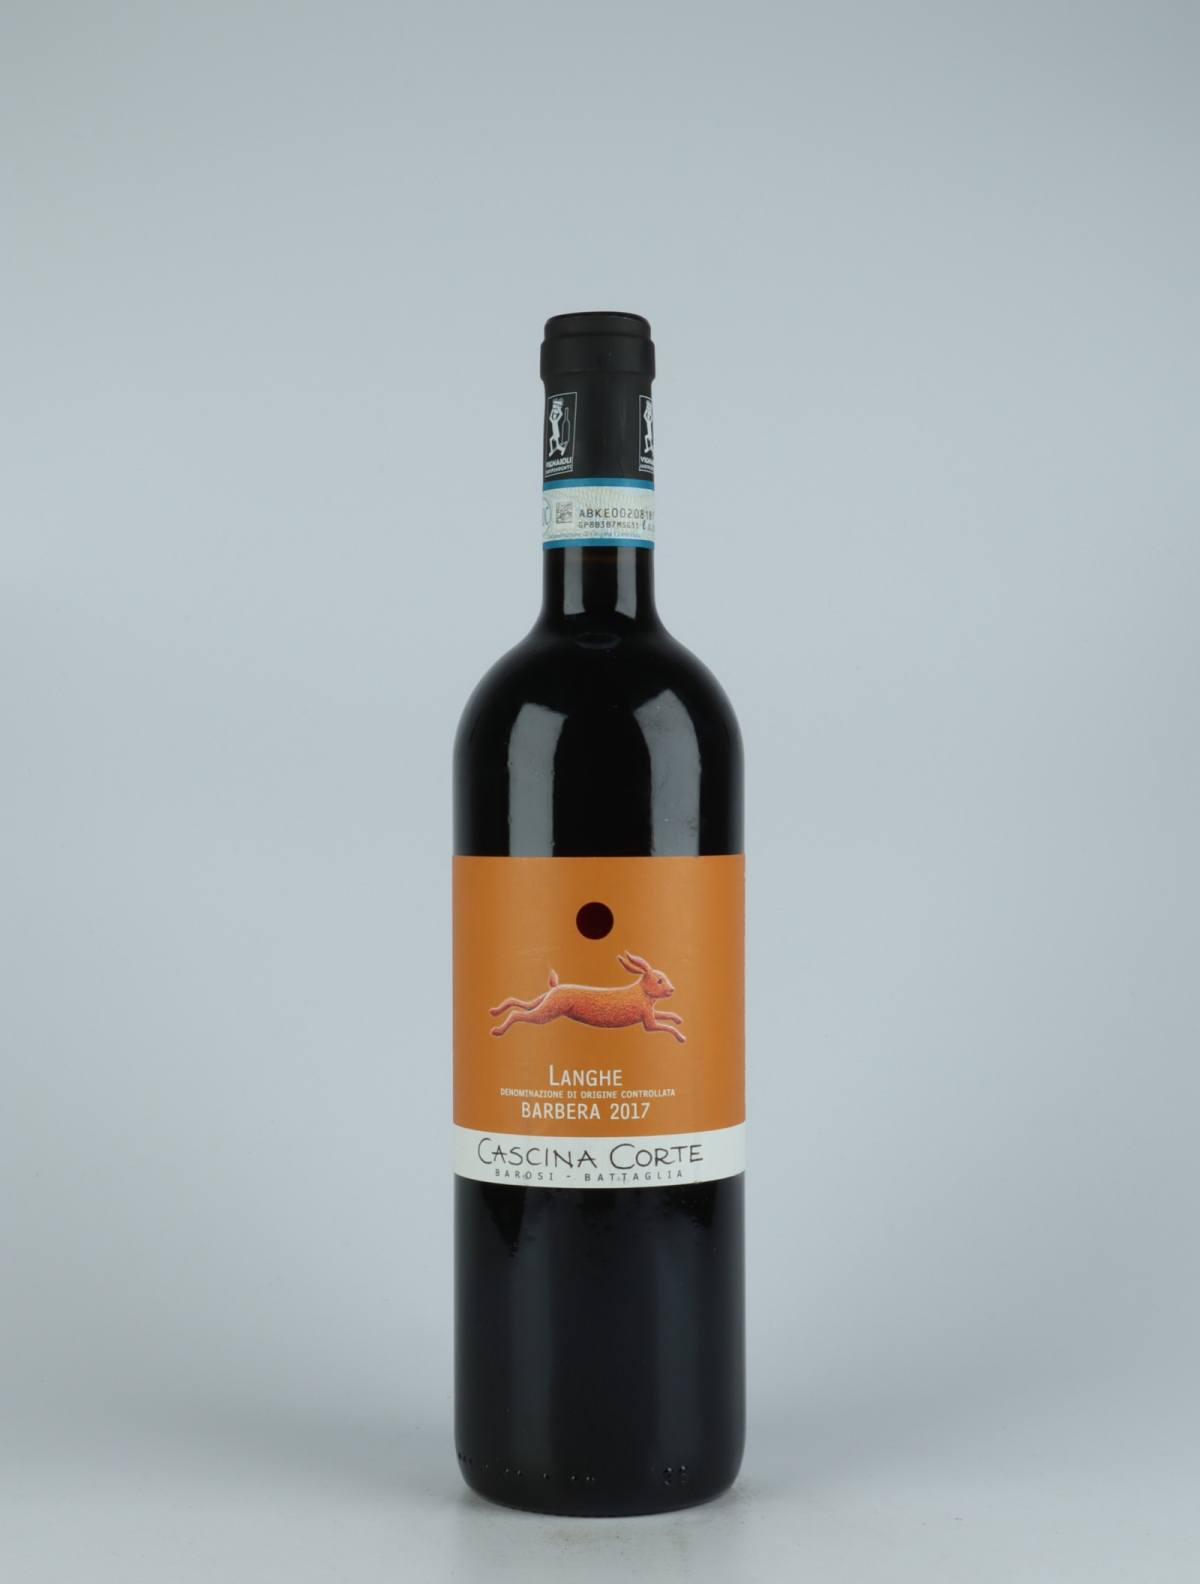 A bottle 2017 Barbera Red wine from Cascina Corte, Piedmont in Italy